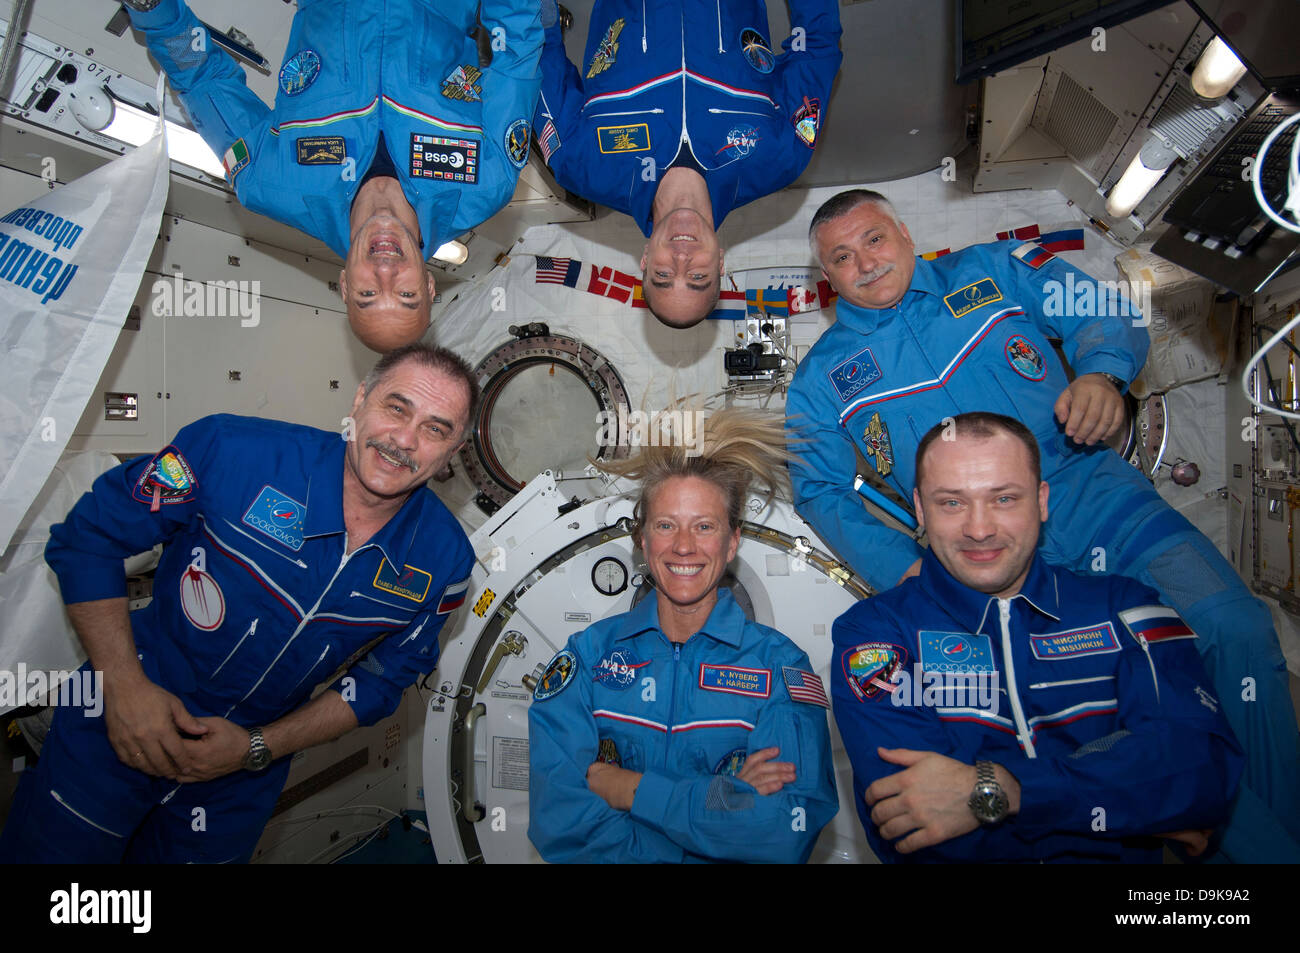 Floating inside the Kibo laboratory in the International Space Station, the six Expedition 36 crew members videotape a tribute to cosmonaut Valentina Tereshkova, who on June 16 will mark the 50th anniversary of her 1963 launch aboard the Soviet Vostok-6 spacecraft June 8, 2013. On the bottom row from left are Expedition 36 Commander Pavel Vinogradov of Russia's Federal Space Agency and Flight Engineers Karen Nyberg of NASA and Alexander Misurkin of Roscosmos. On top are from left Flight Engineers Luca Parmitano of the ESA, Chris Cassidy of NASA and Fyodor Yurchikhin of Roscosmos. Stock Photo